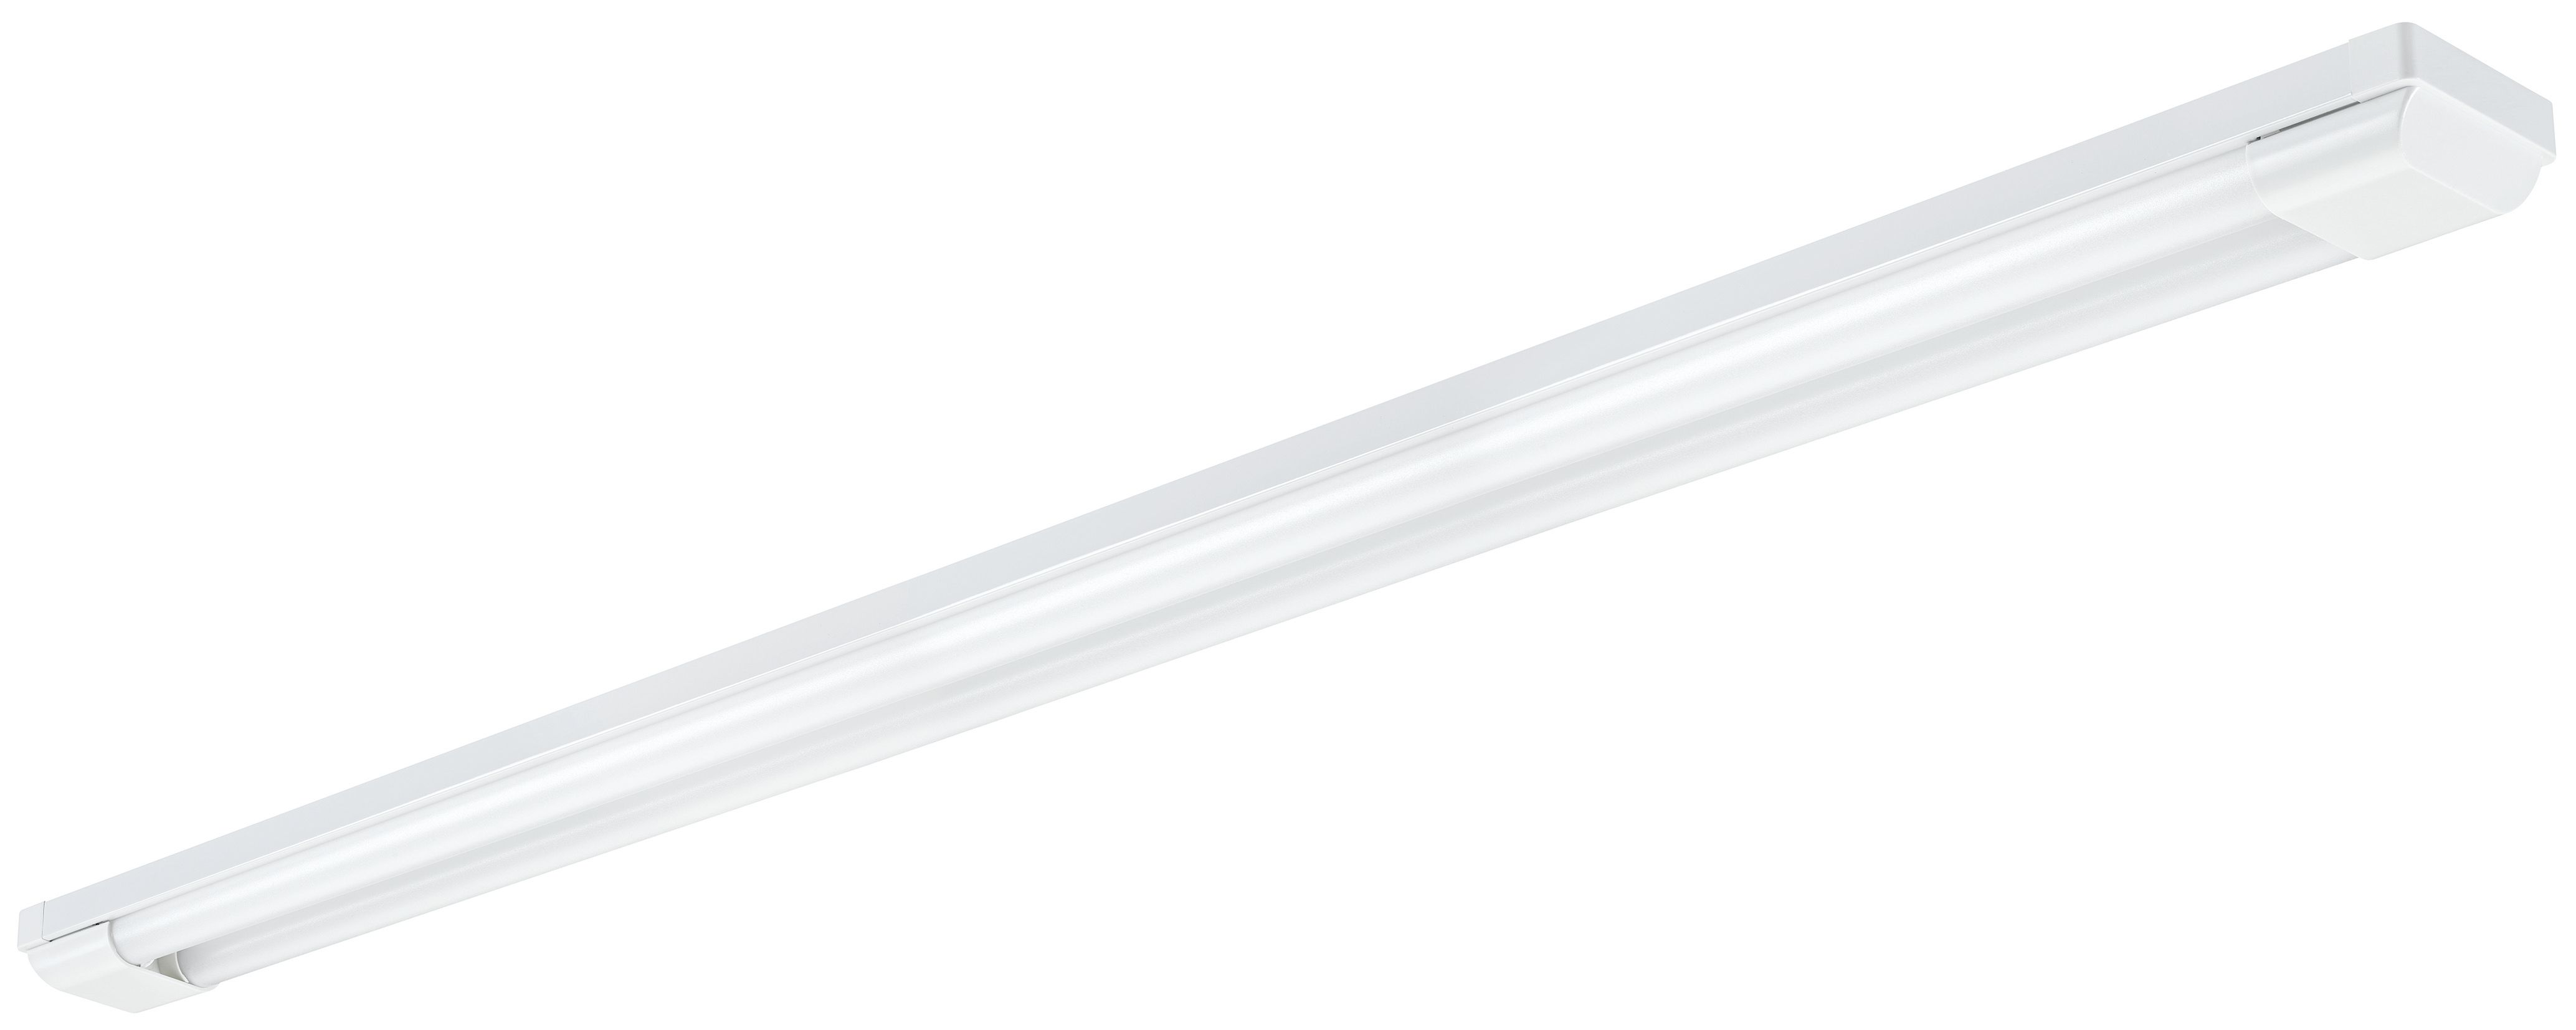 Sylvania Twin 4ft IP20 Light Fitting with T8 Integrated LED Tube - 30W